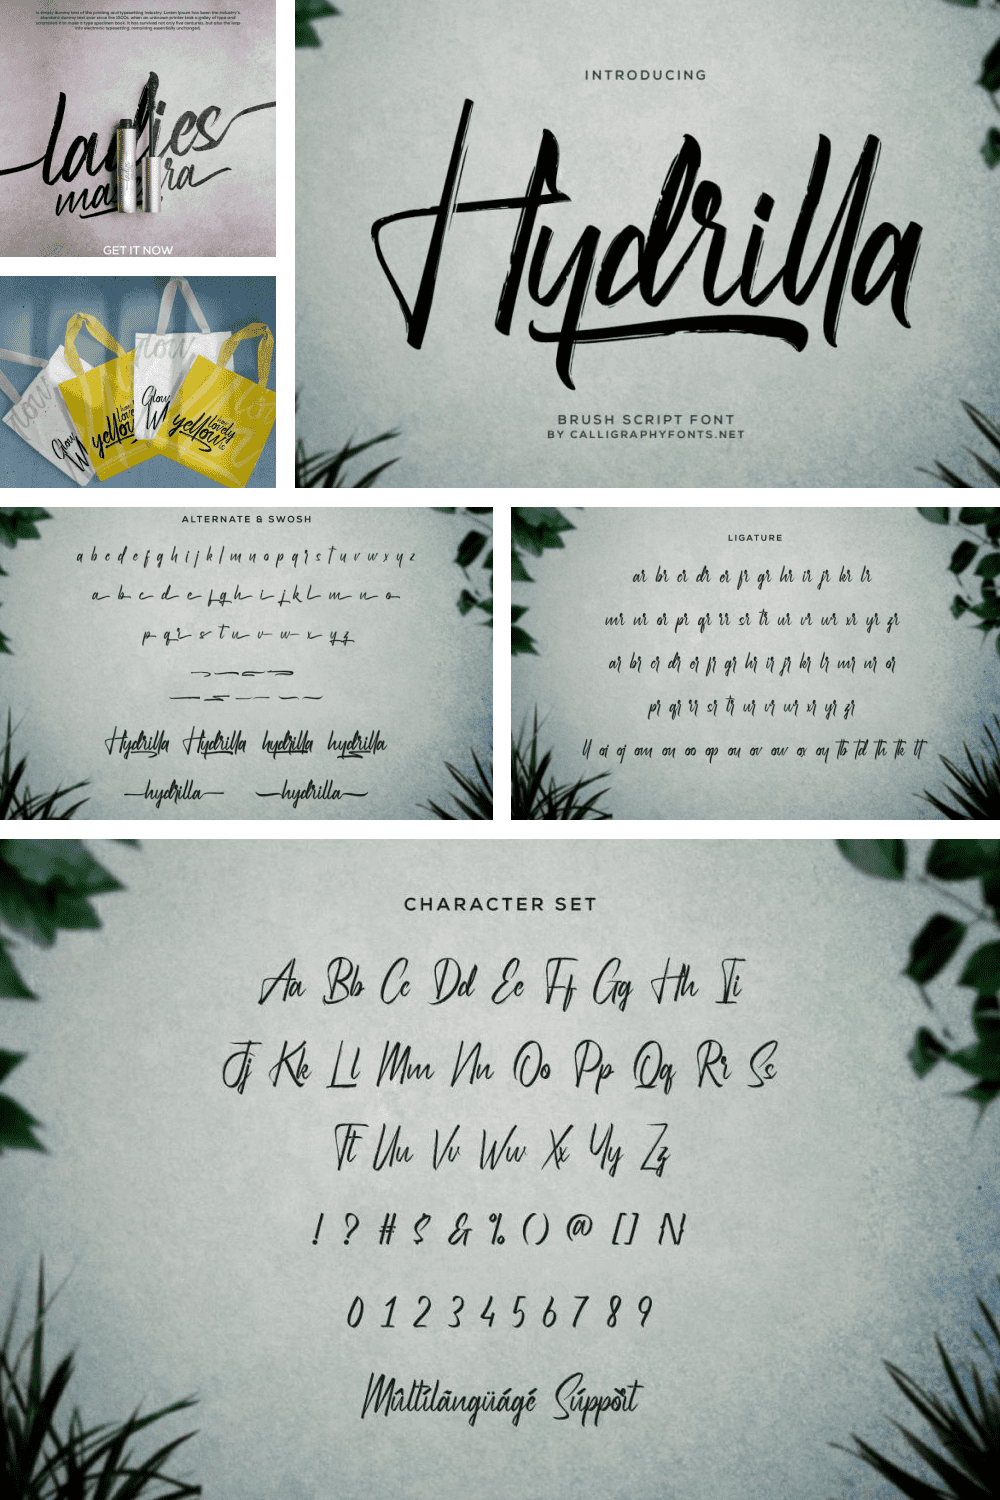 Bright writing and eye-catching font.